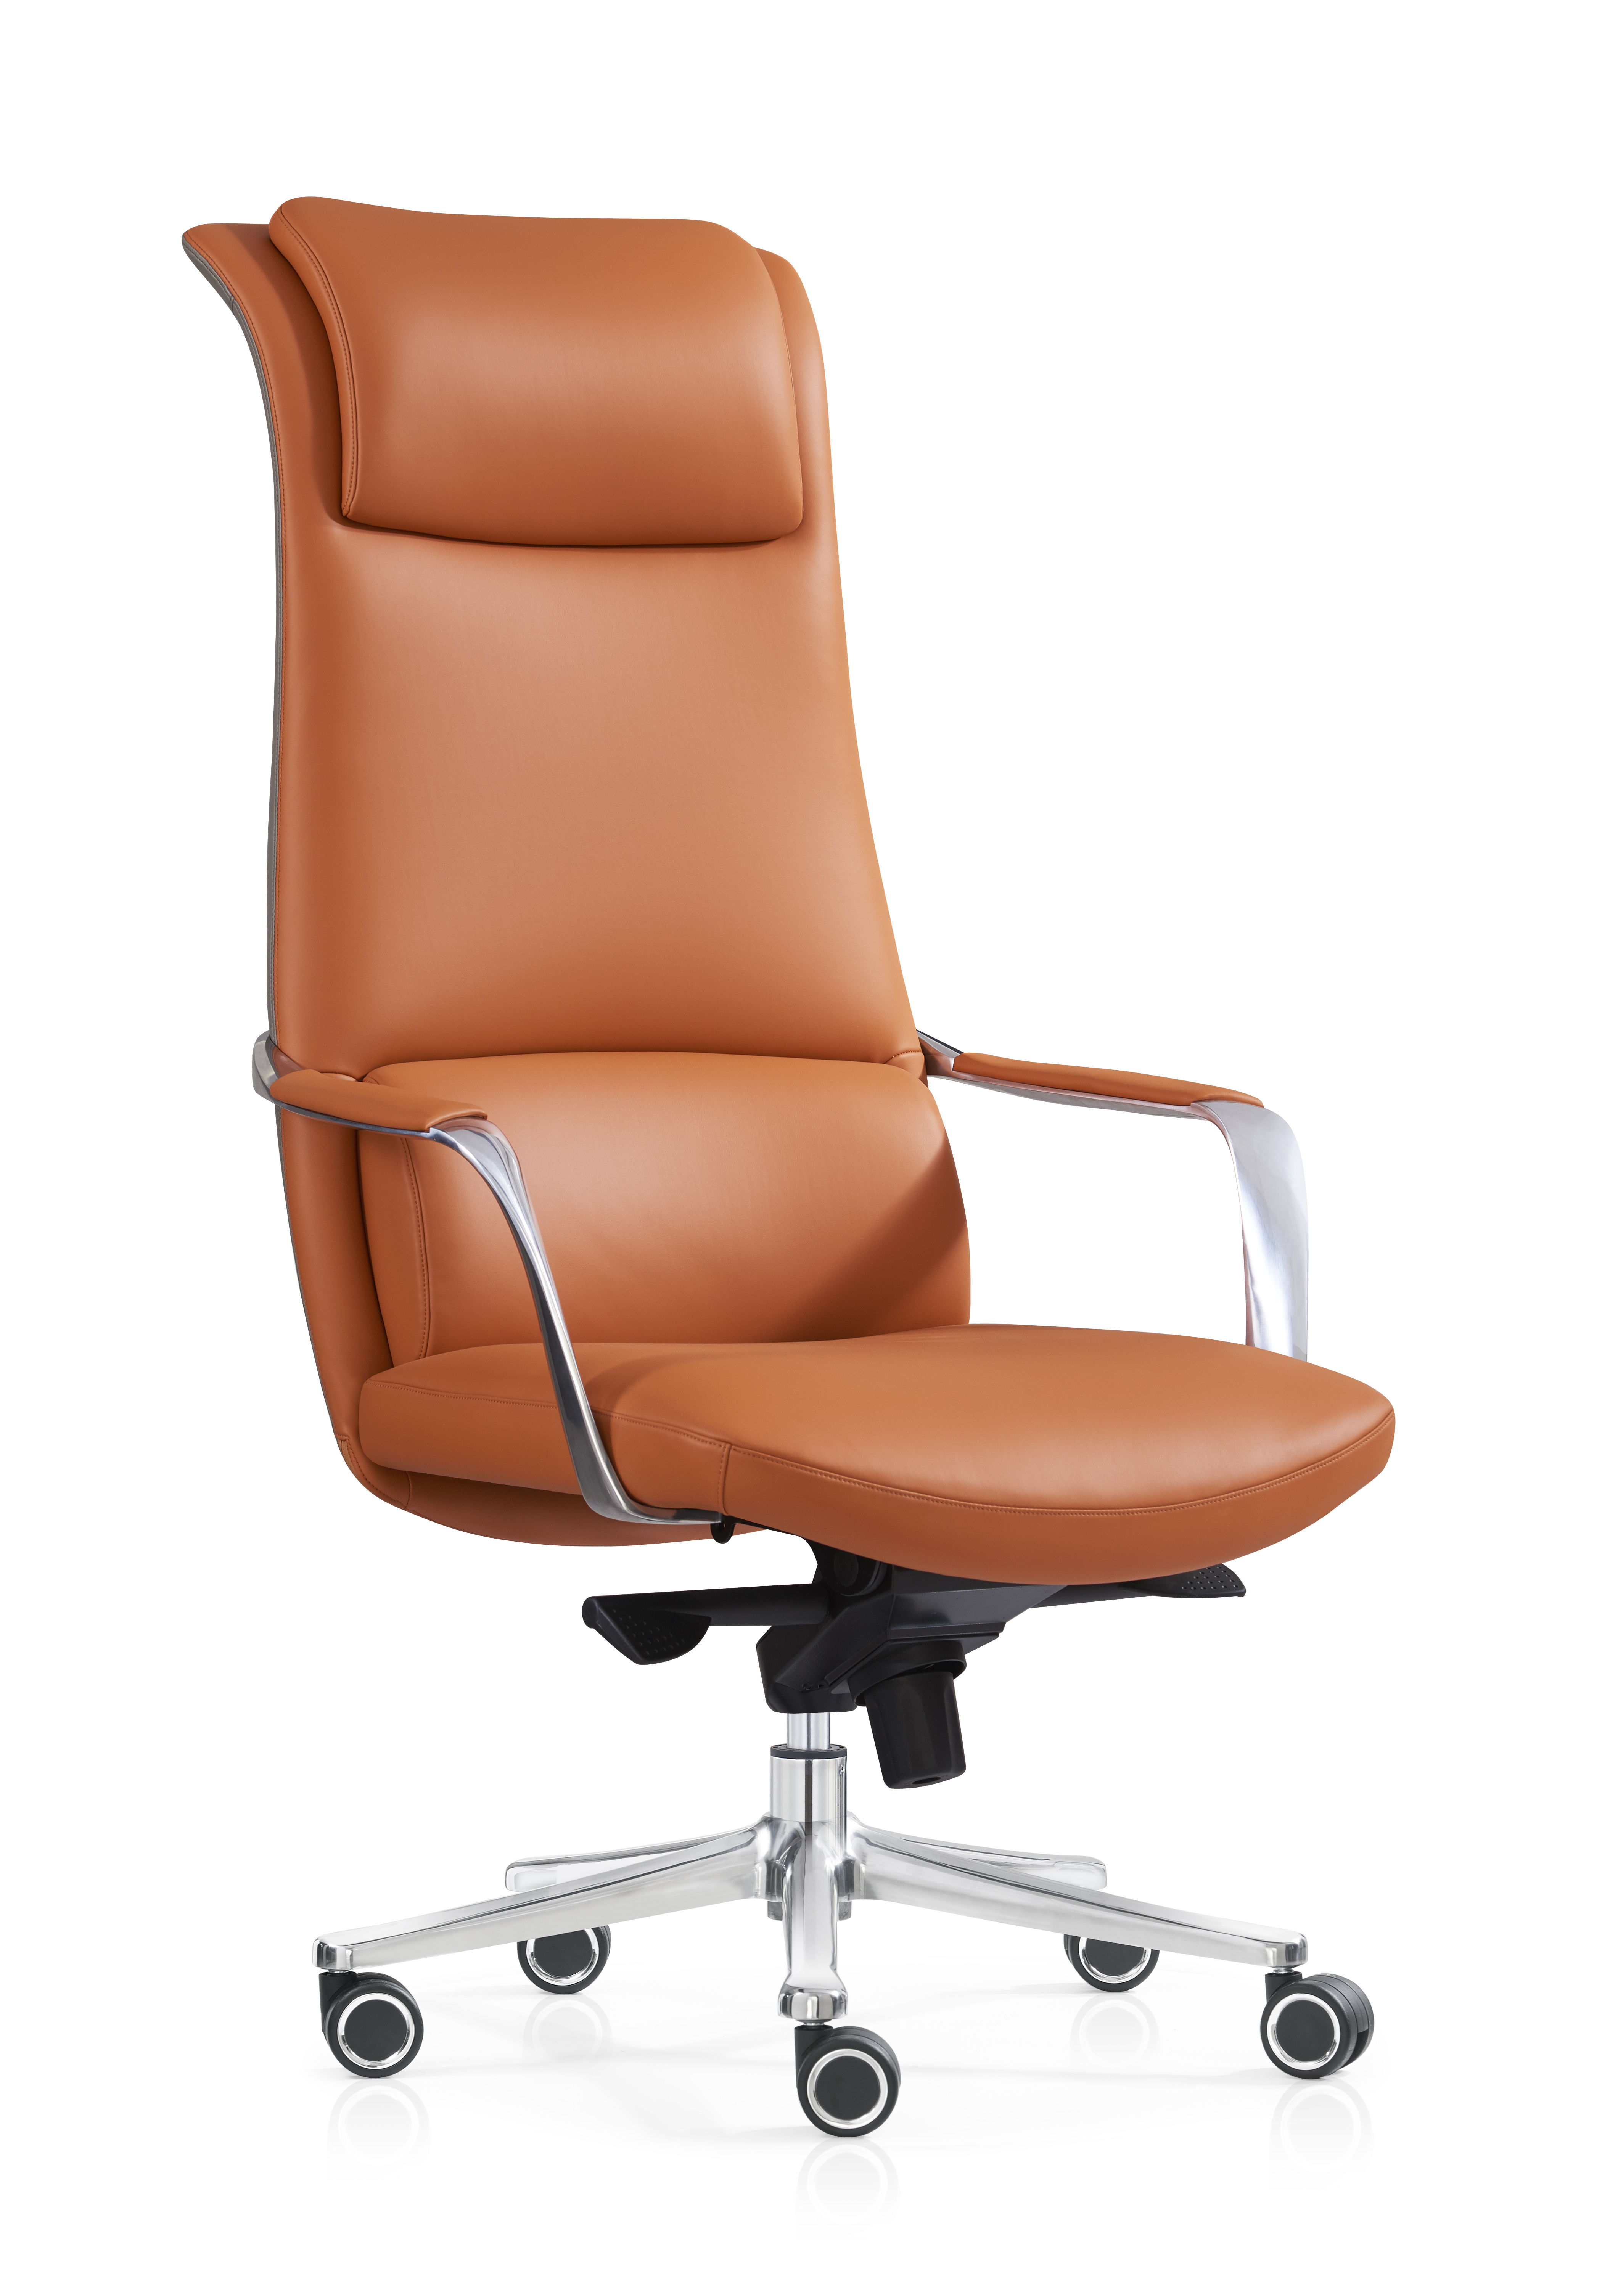 Modern CEO High Back Office Chair Orange Leaather